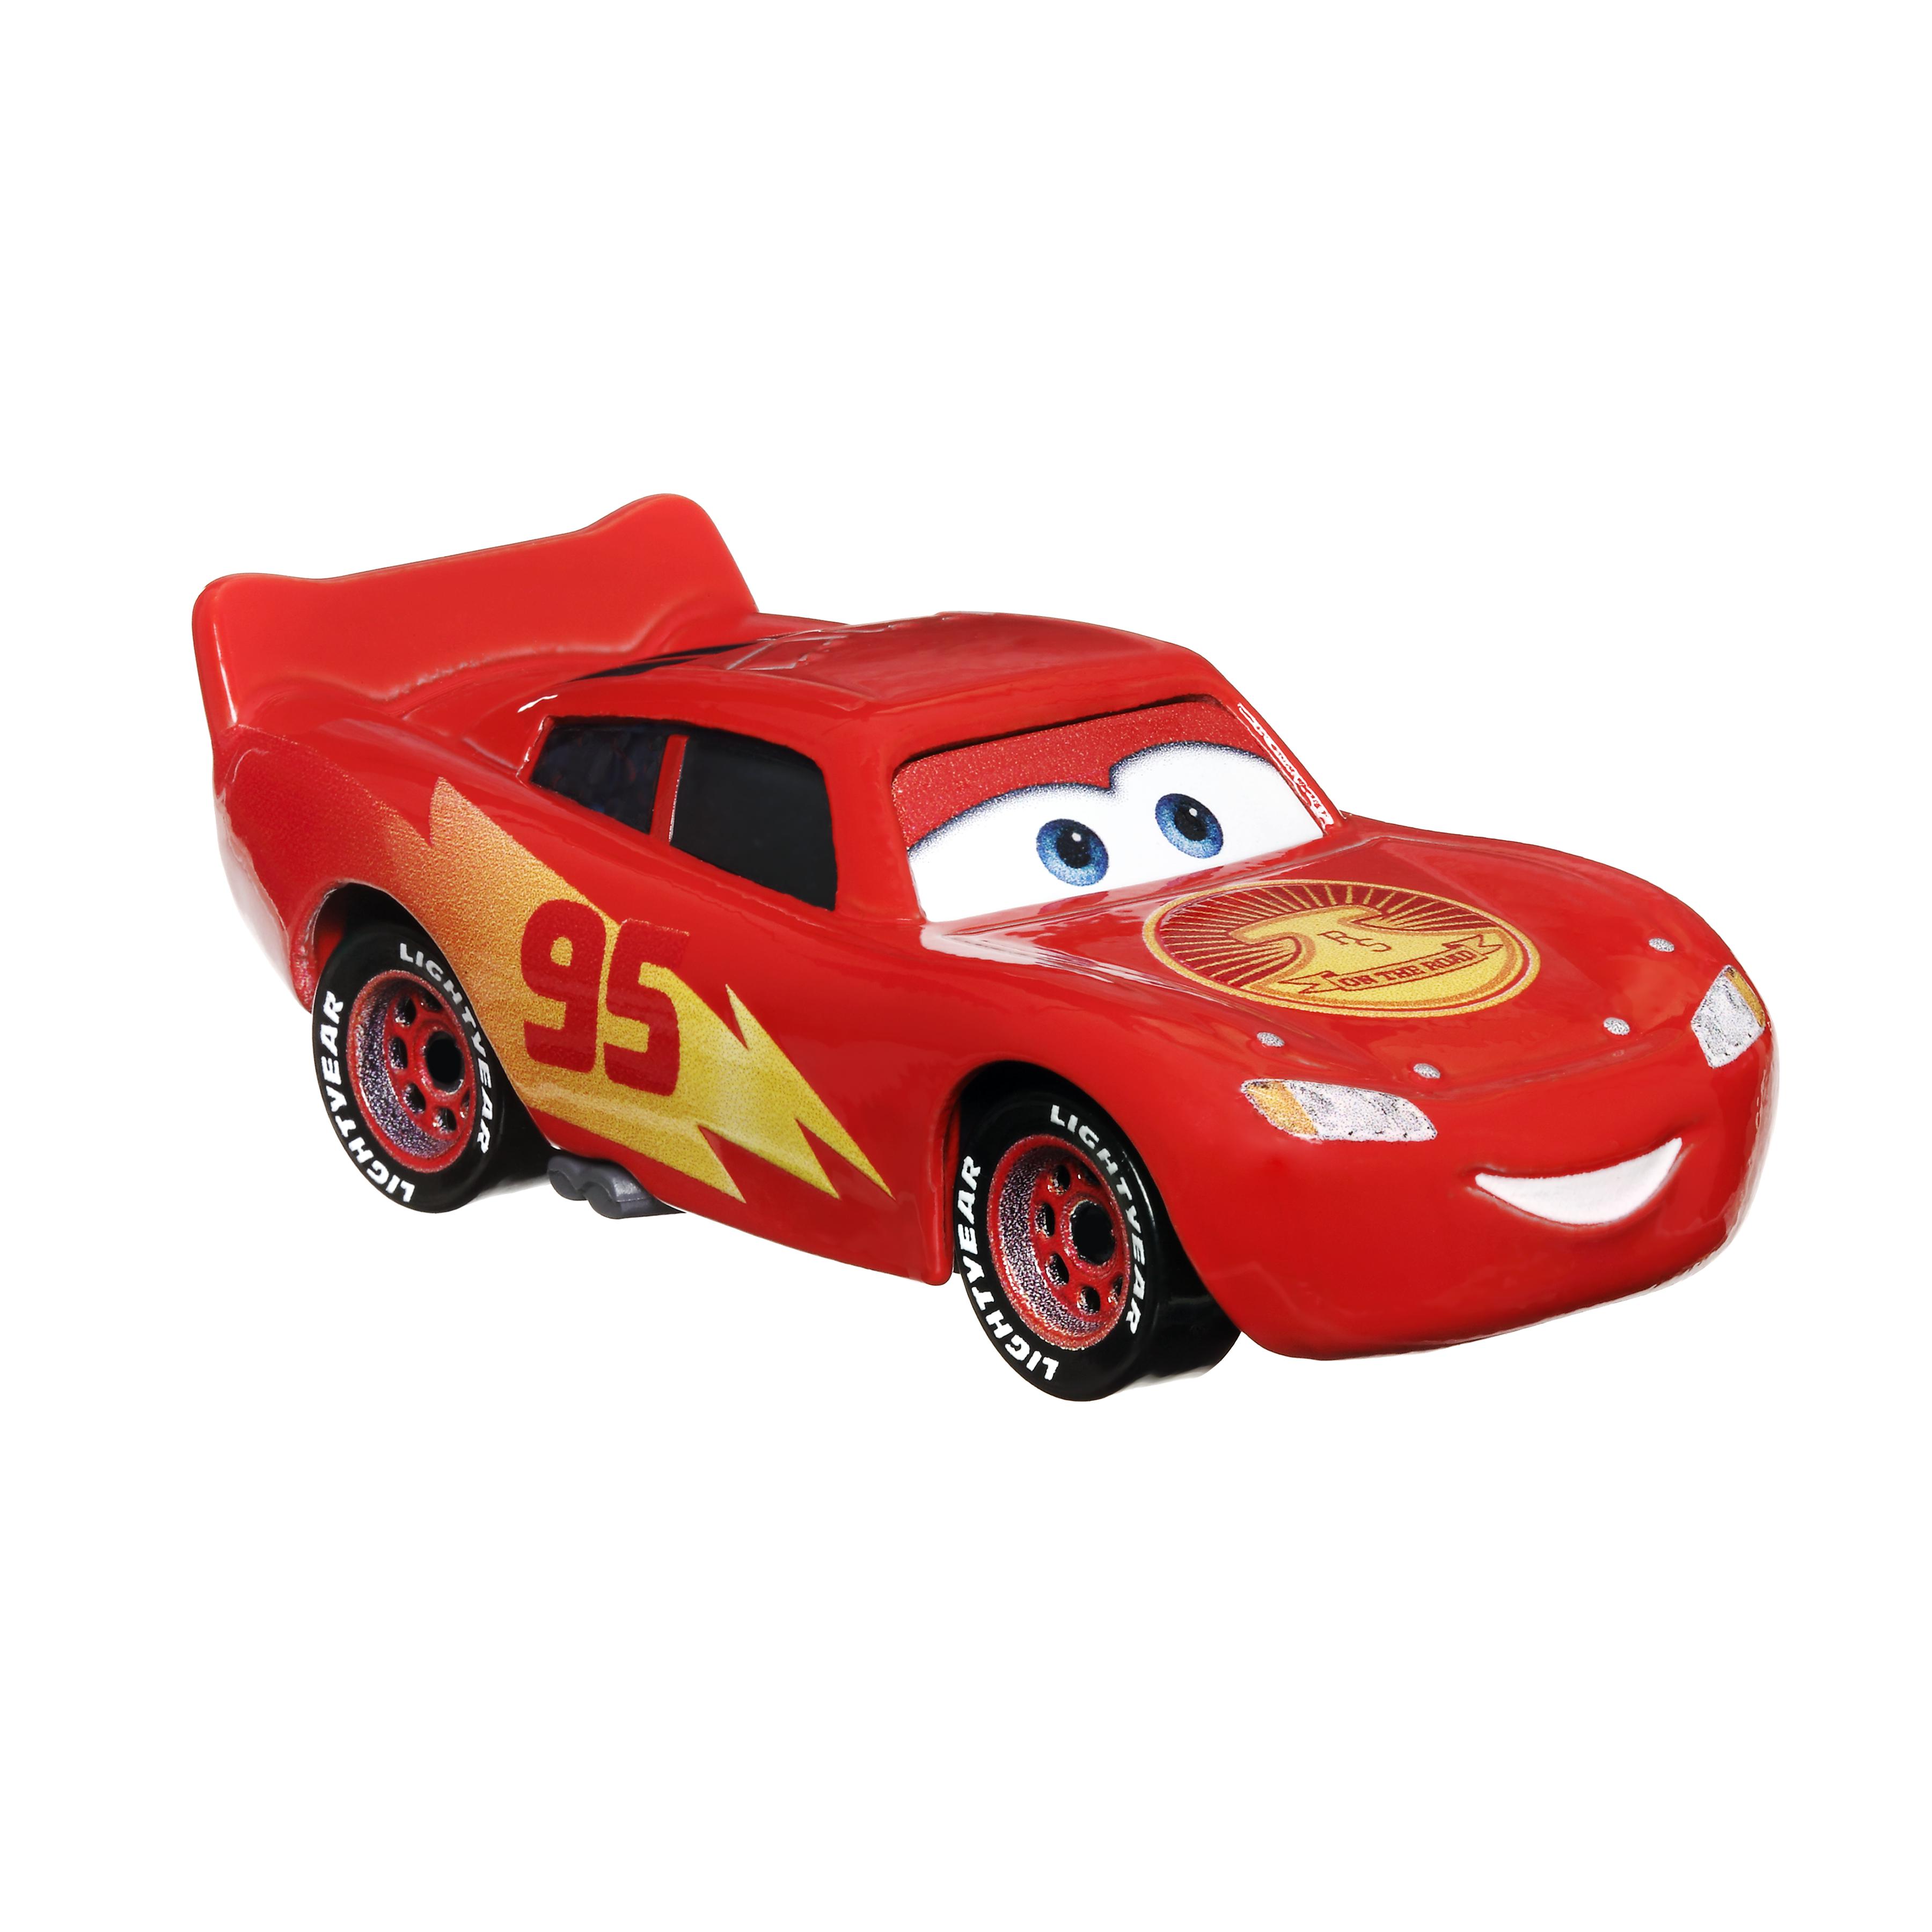 CARS ΑΥΤΟΚΙΝΗΤΑΚΙΑ-HHT95 (ON THE ROAD ROAD TRIP LIGHTNING MCQUEEN)